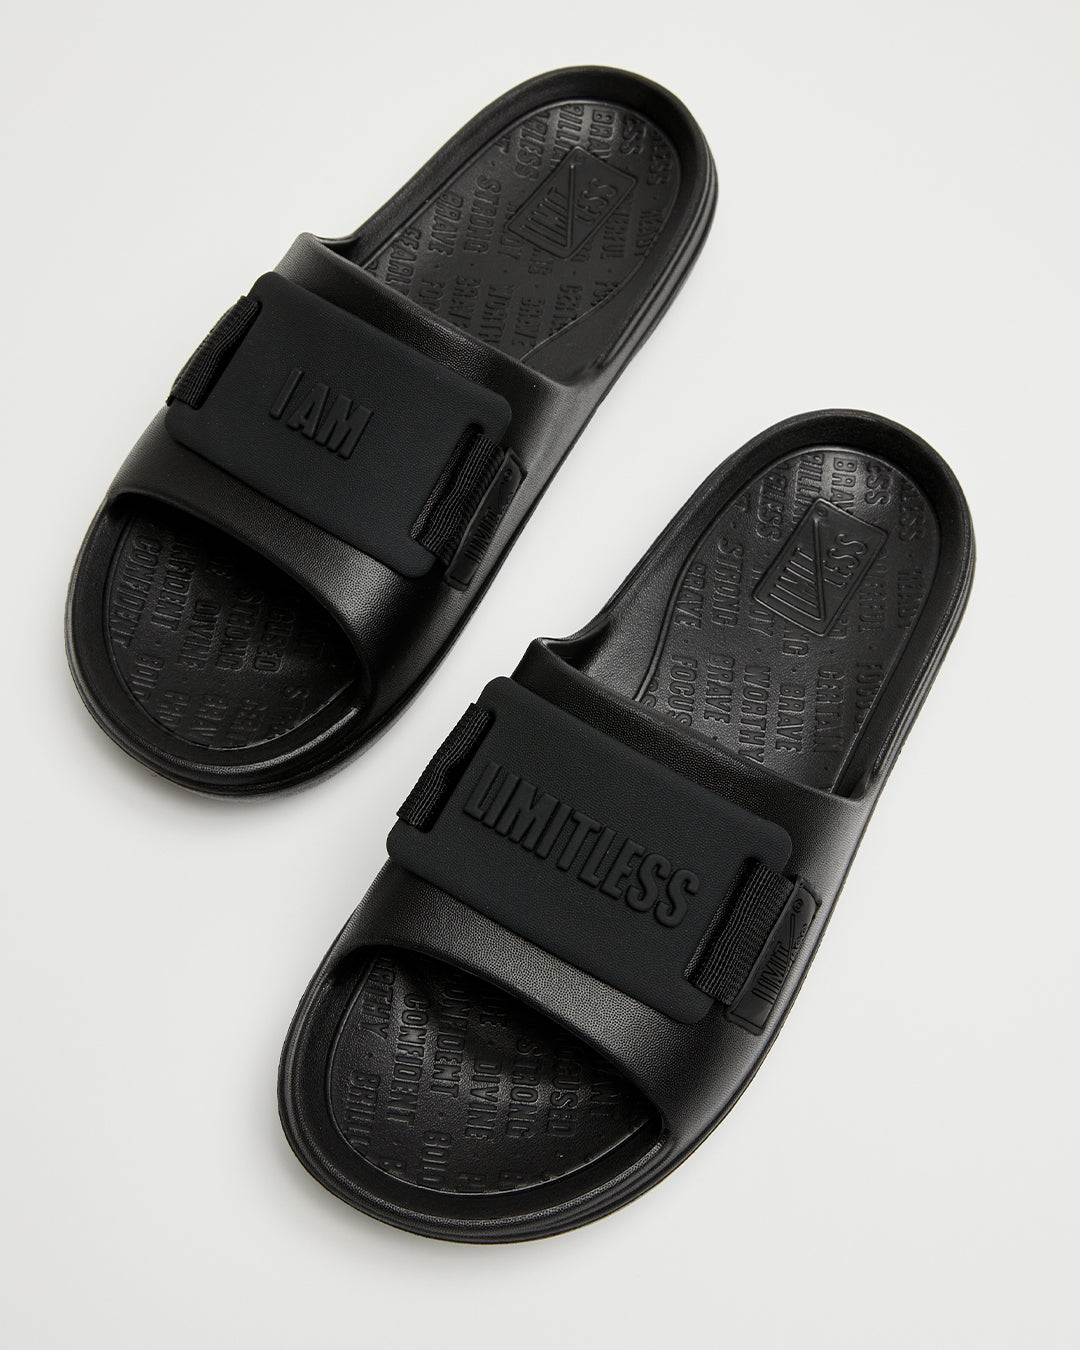 LIMITLESS SLIDES™ WITH ESSENTIAL TIBAH™ QUAD - LUTHERAN HIGH SCHOOL EDITION